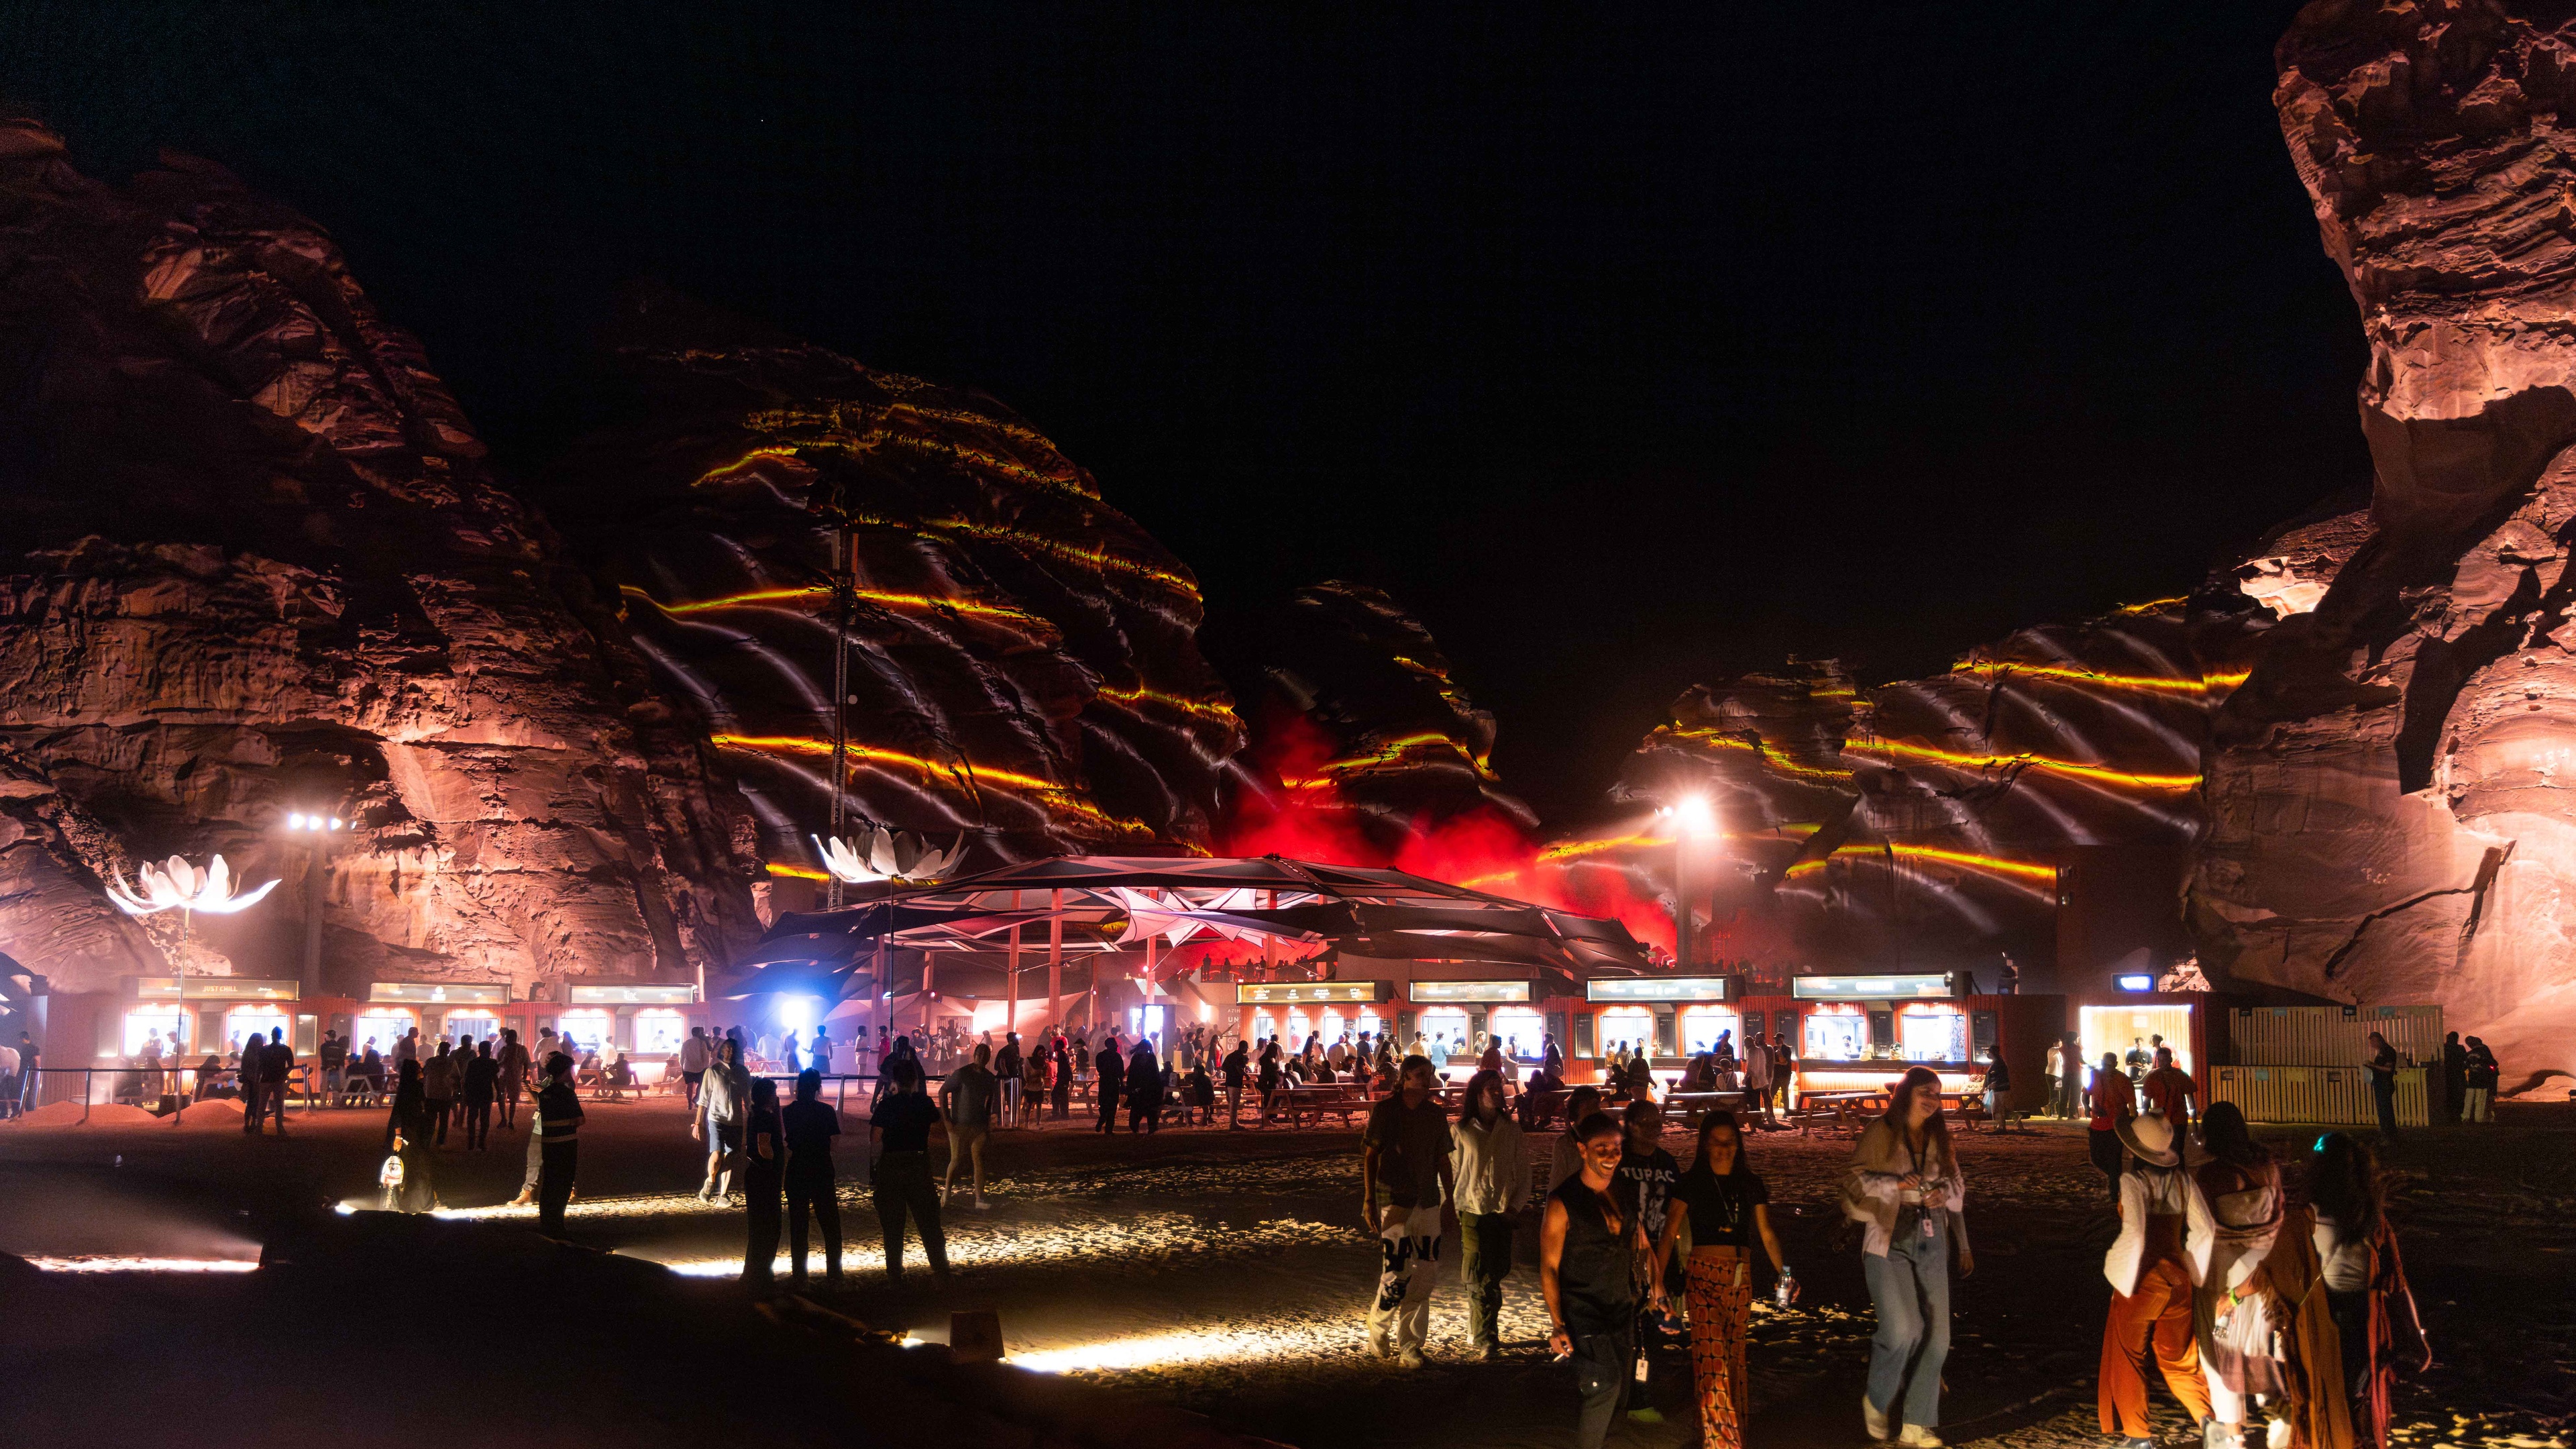 Crowd of people walking between rocky mountains at a festival with spotlights